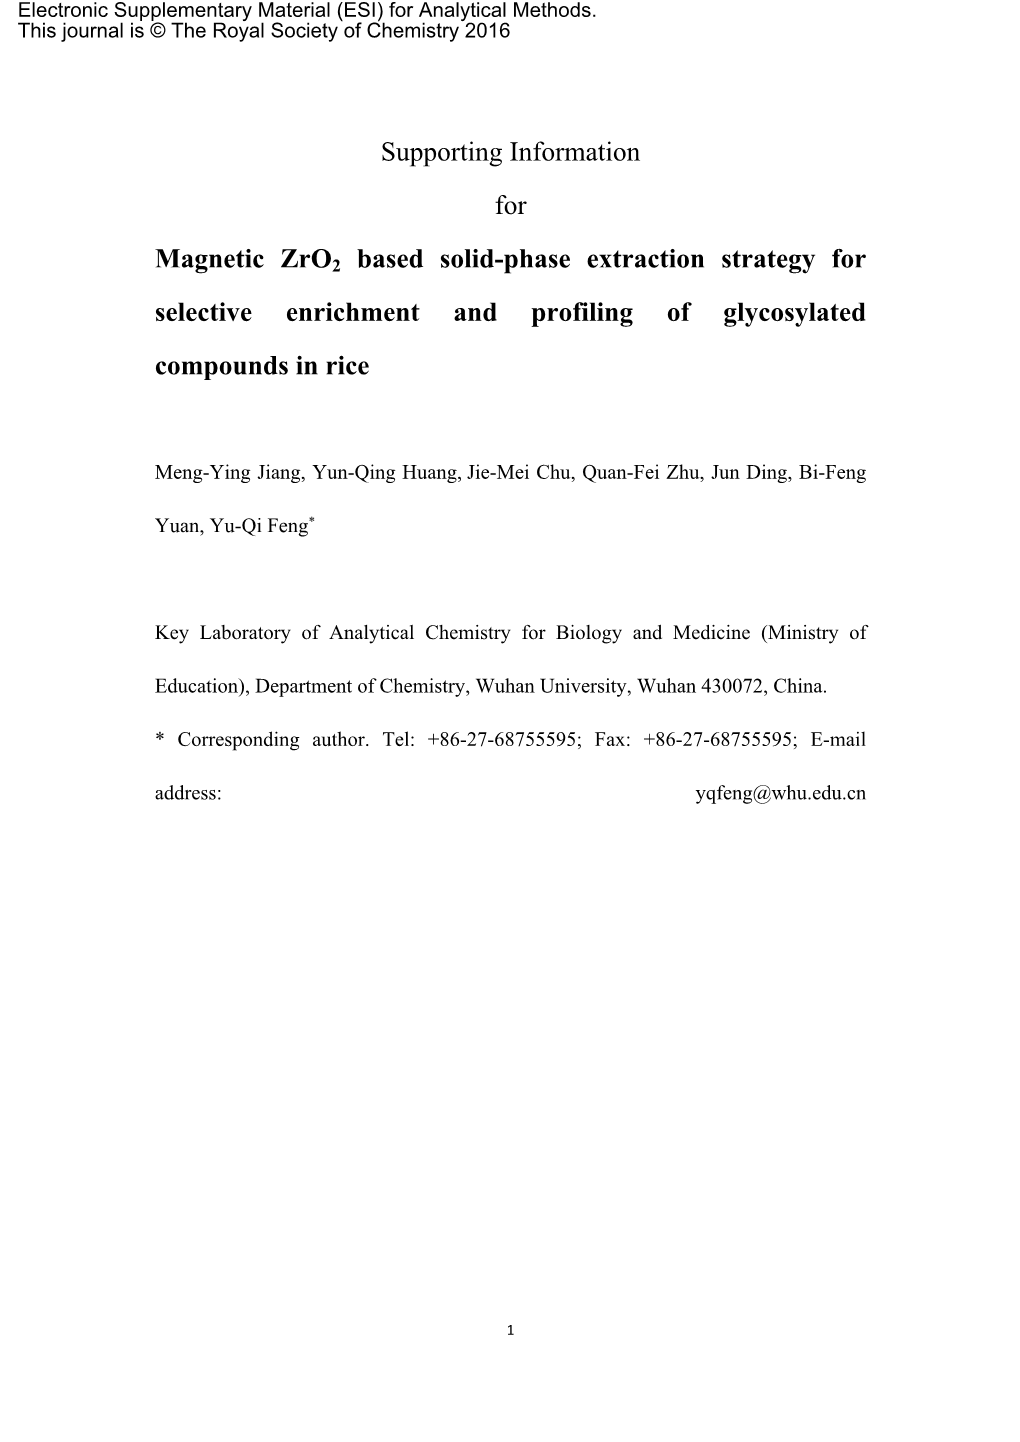 Supporting Information for Magnetic Zro2 Based Solid-Phase Extraction